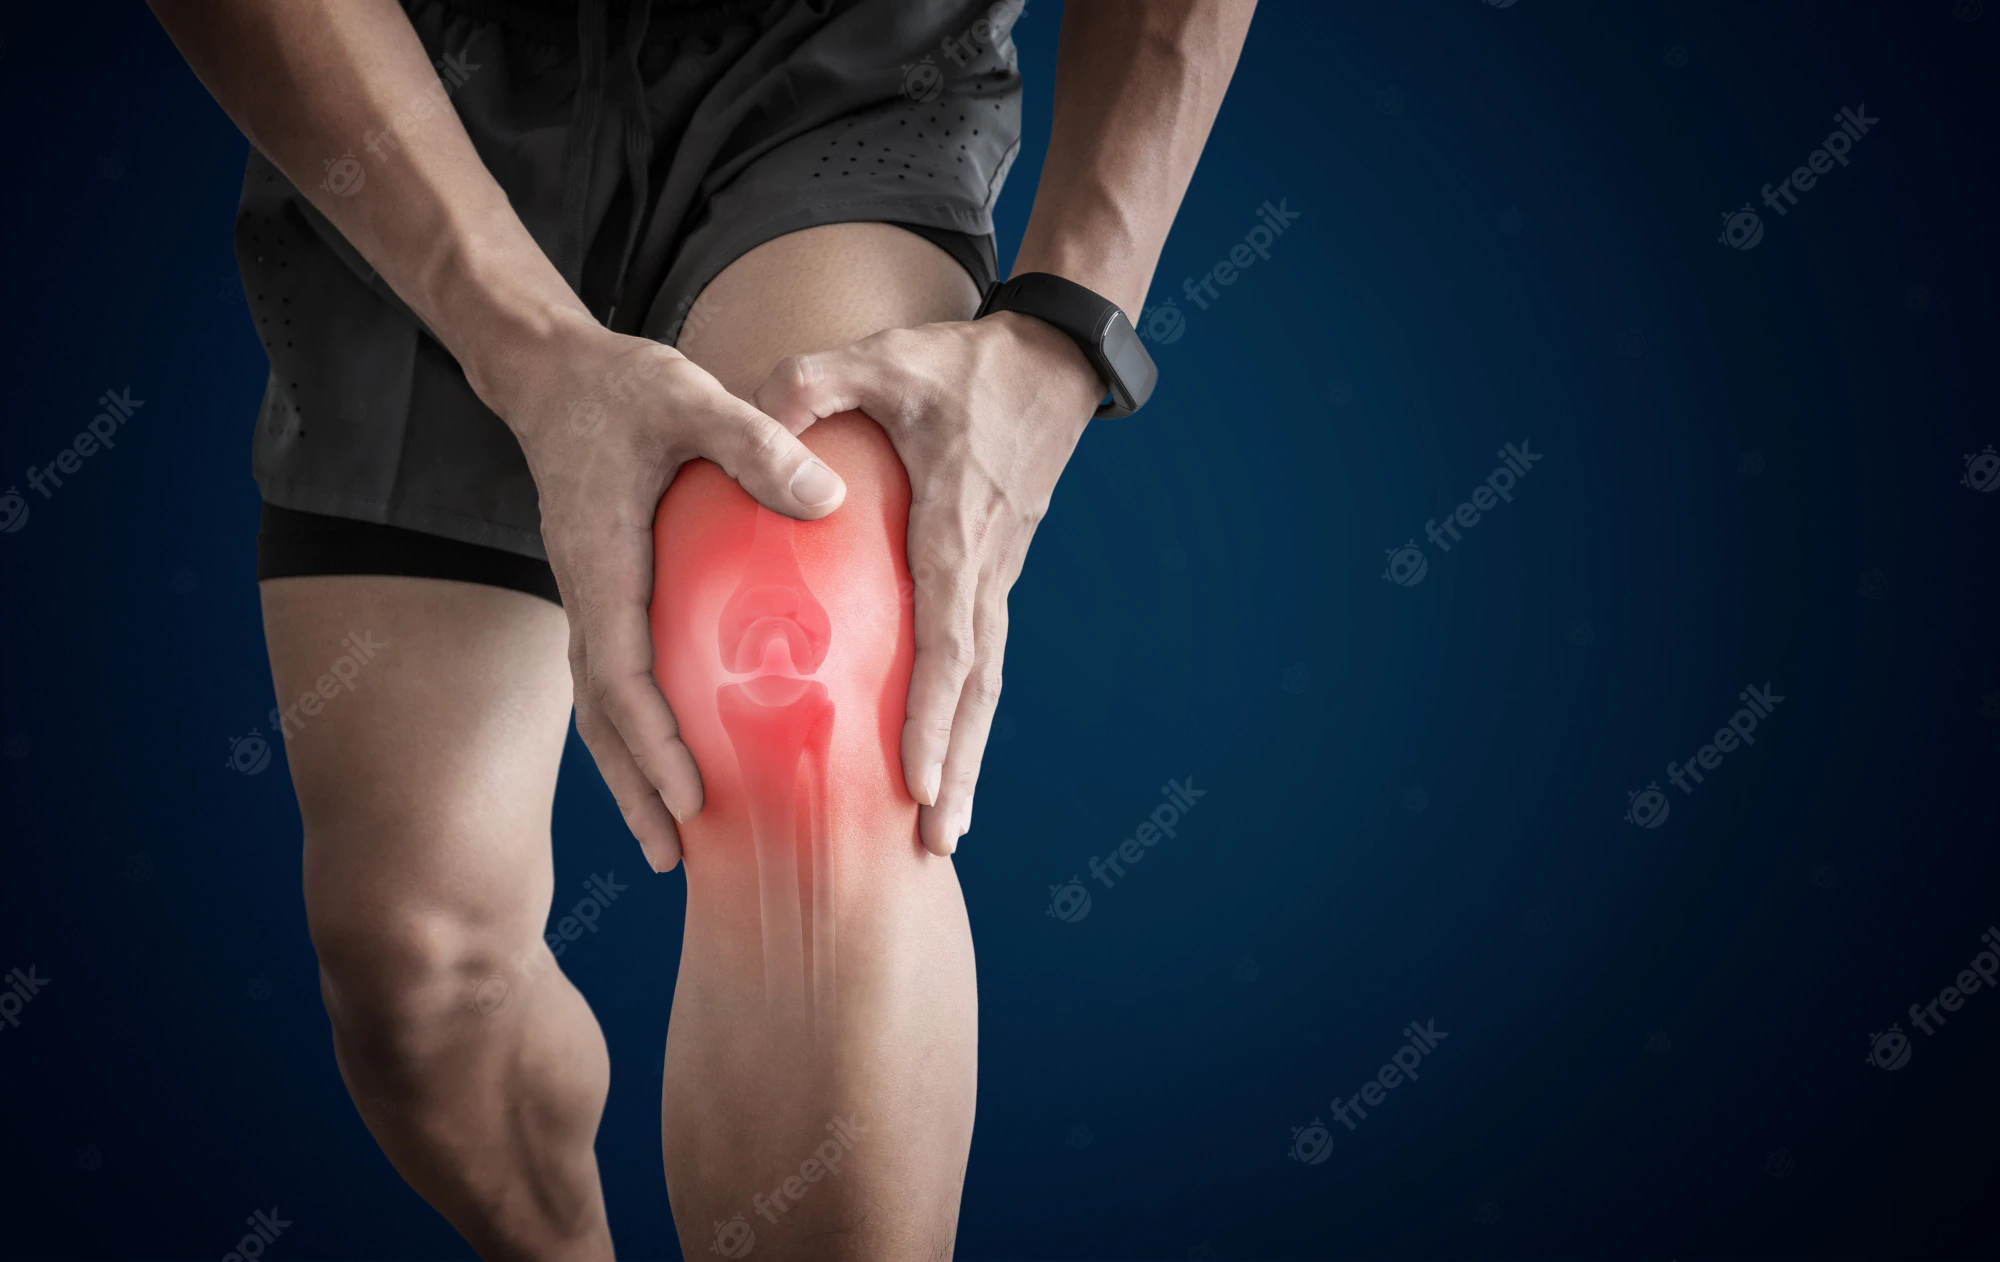 Homeopathic Remedies for Joint Pains- Other Than Ibuprofen